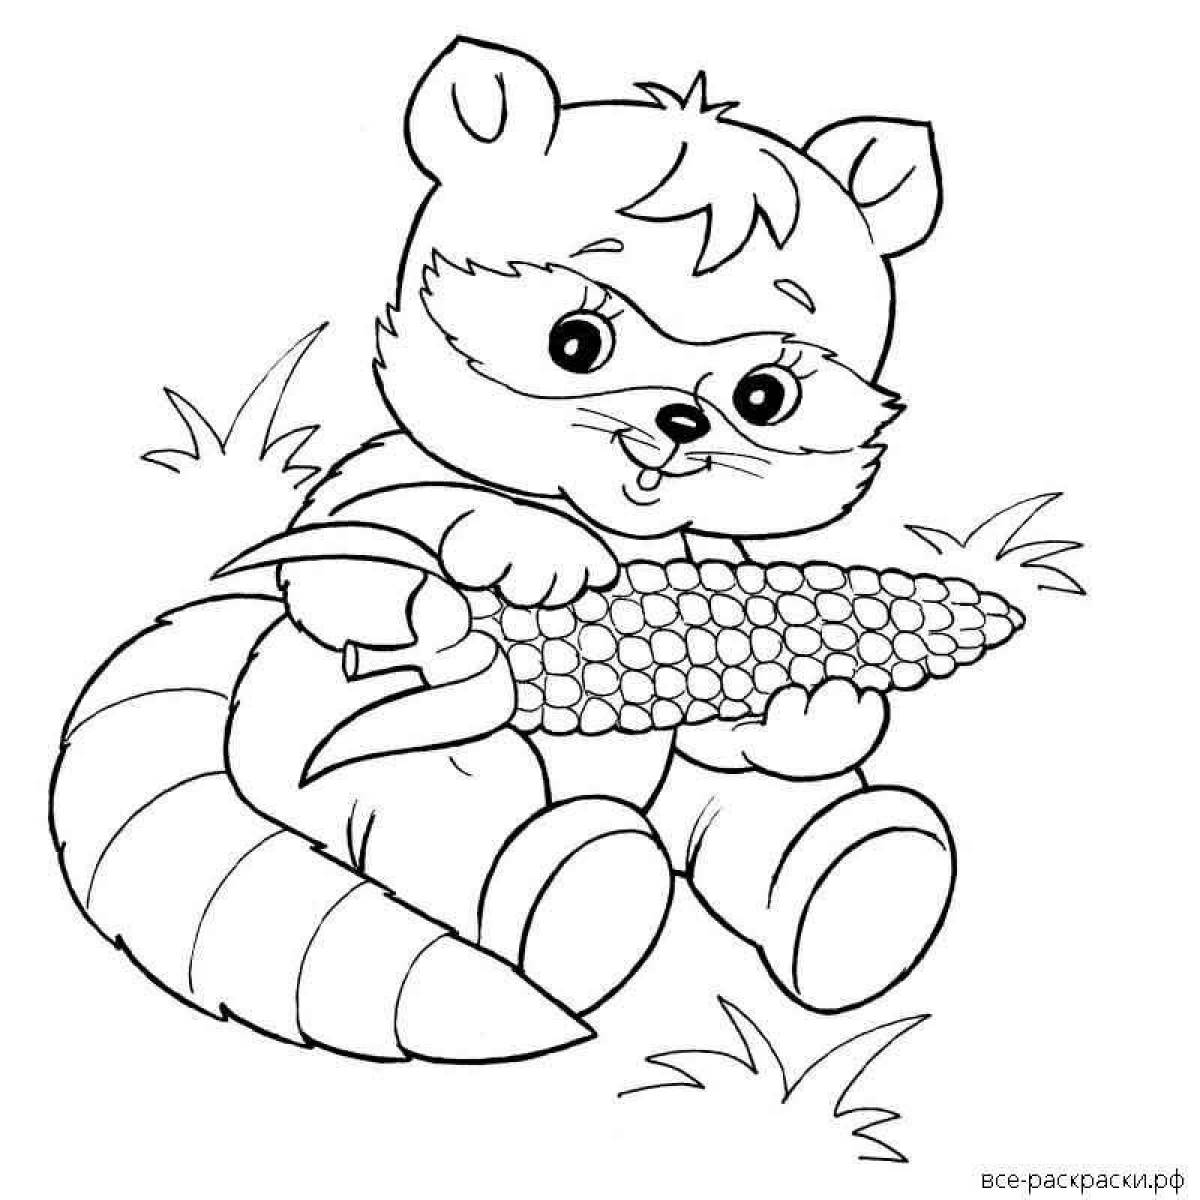 Color-frenzy raccoon coloring page for kids